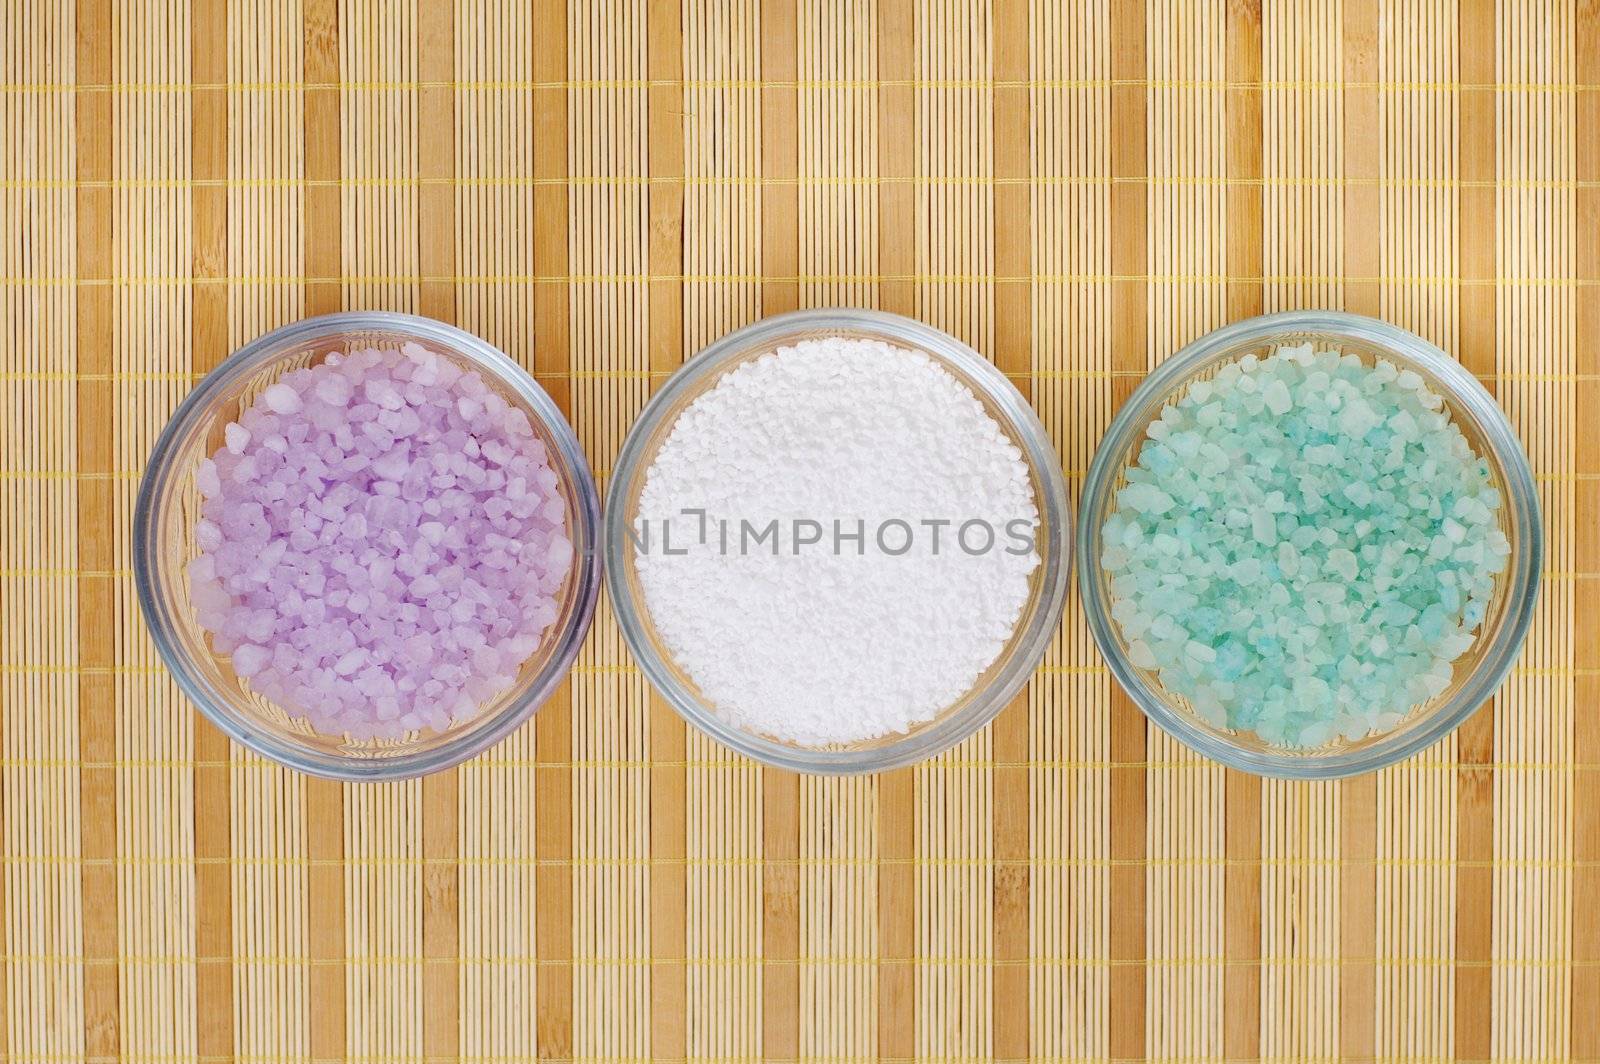 Colored bath salt displayed on top of a bamboo mat.